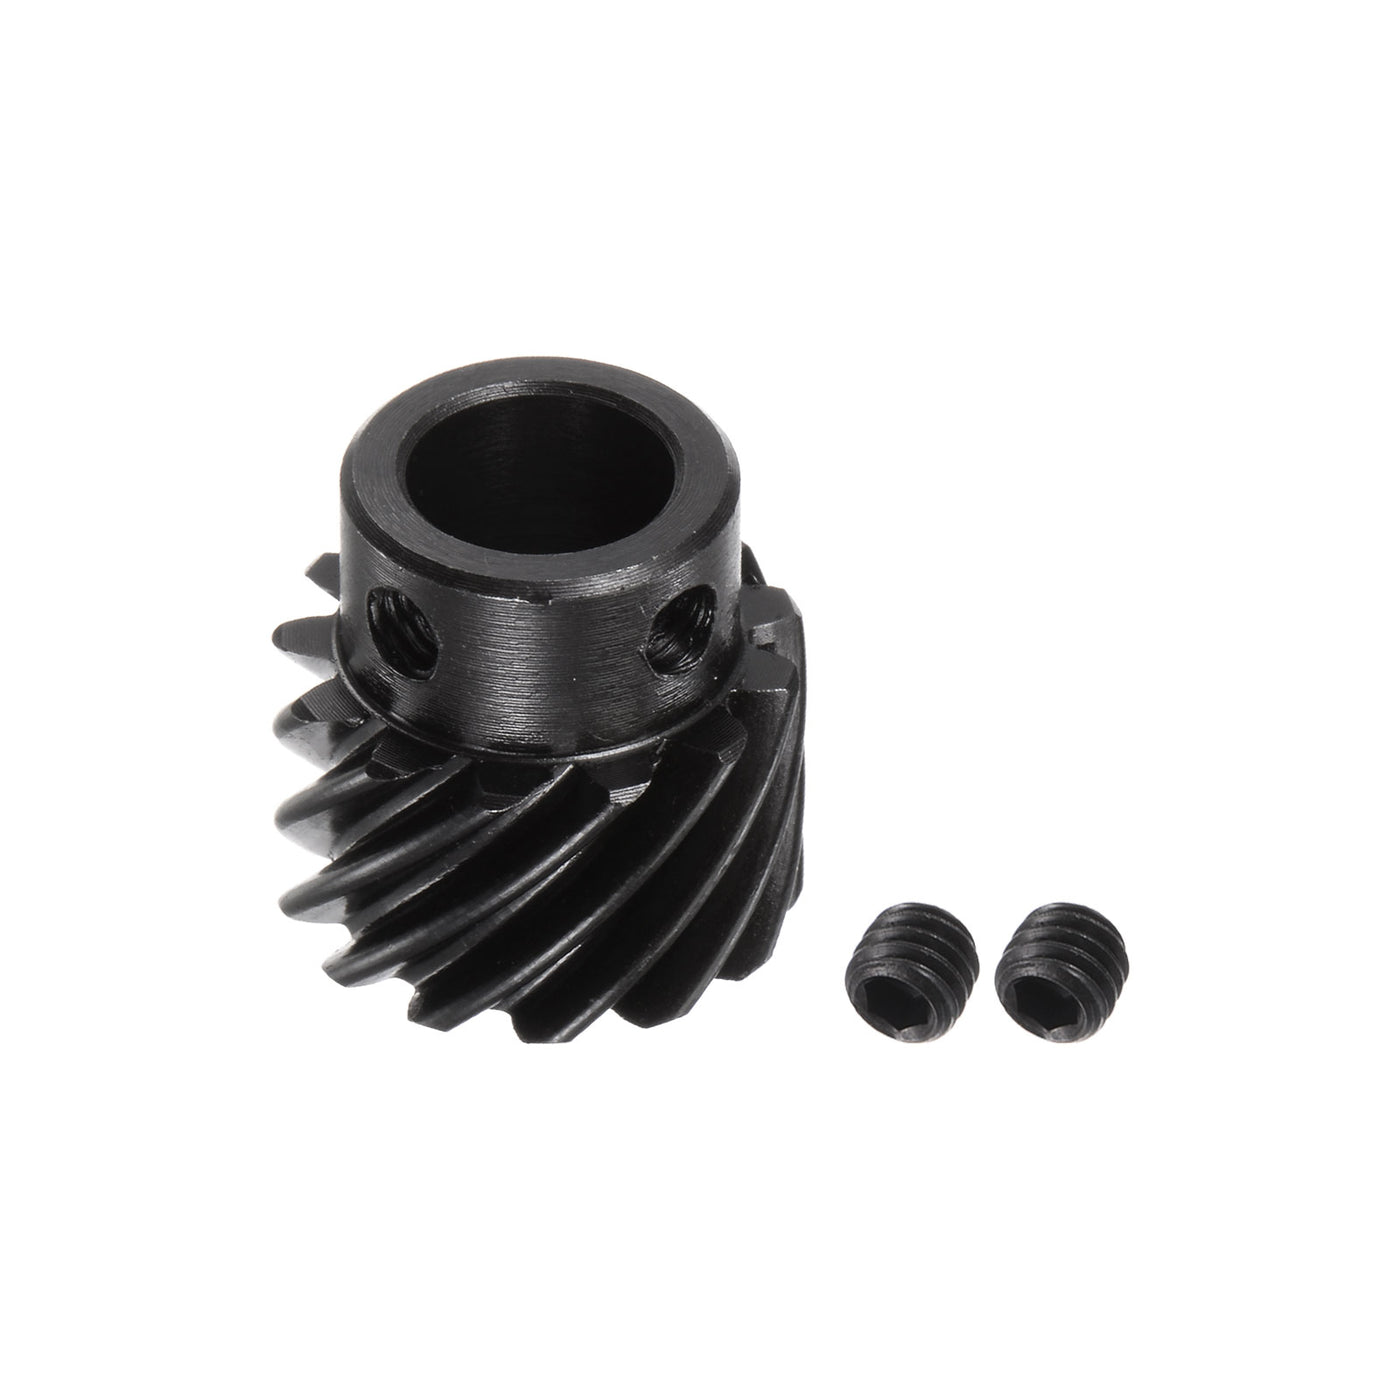 uxcell Uxcell 10mm Aperture 13T Helical Gear 1 Mod Hardened Steel Motor Gear, Right Direction